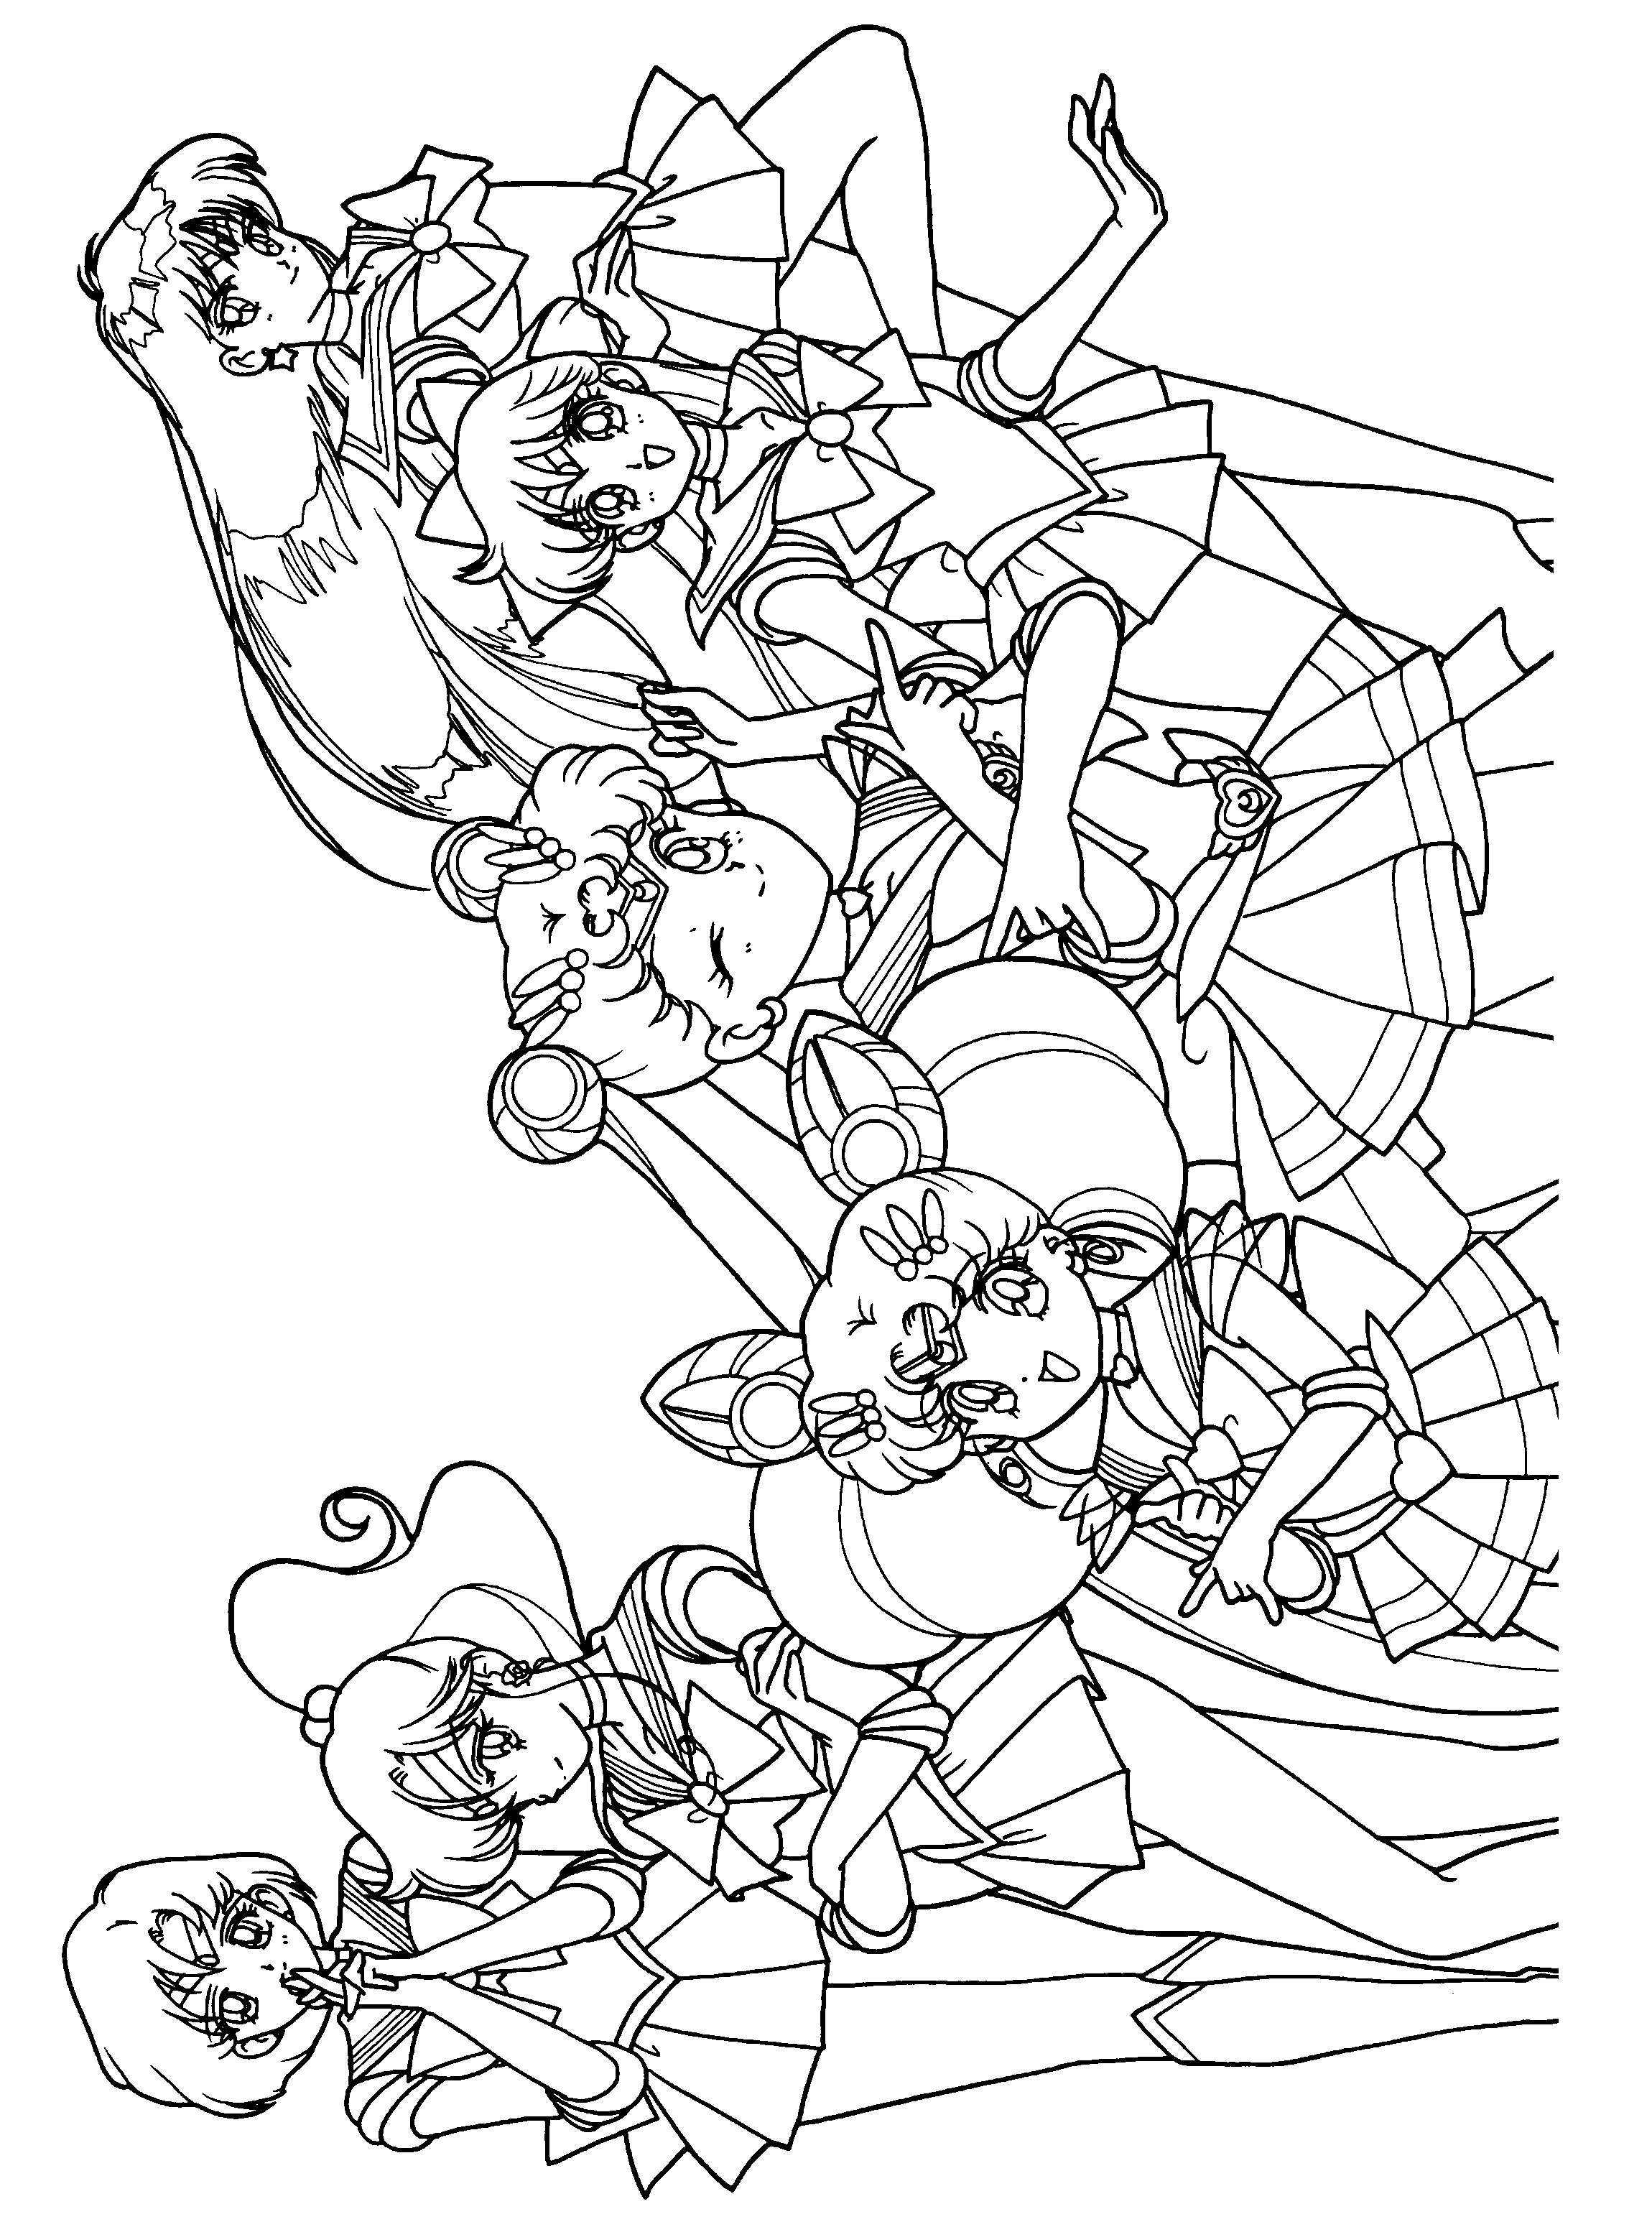 sailor moon all sailor scouts coloring pages - photo #10